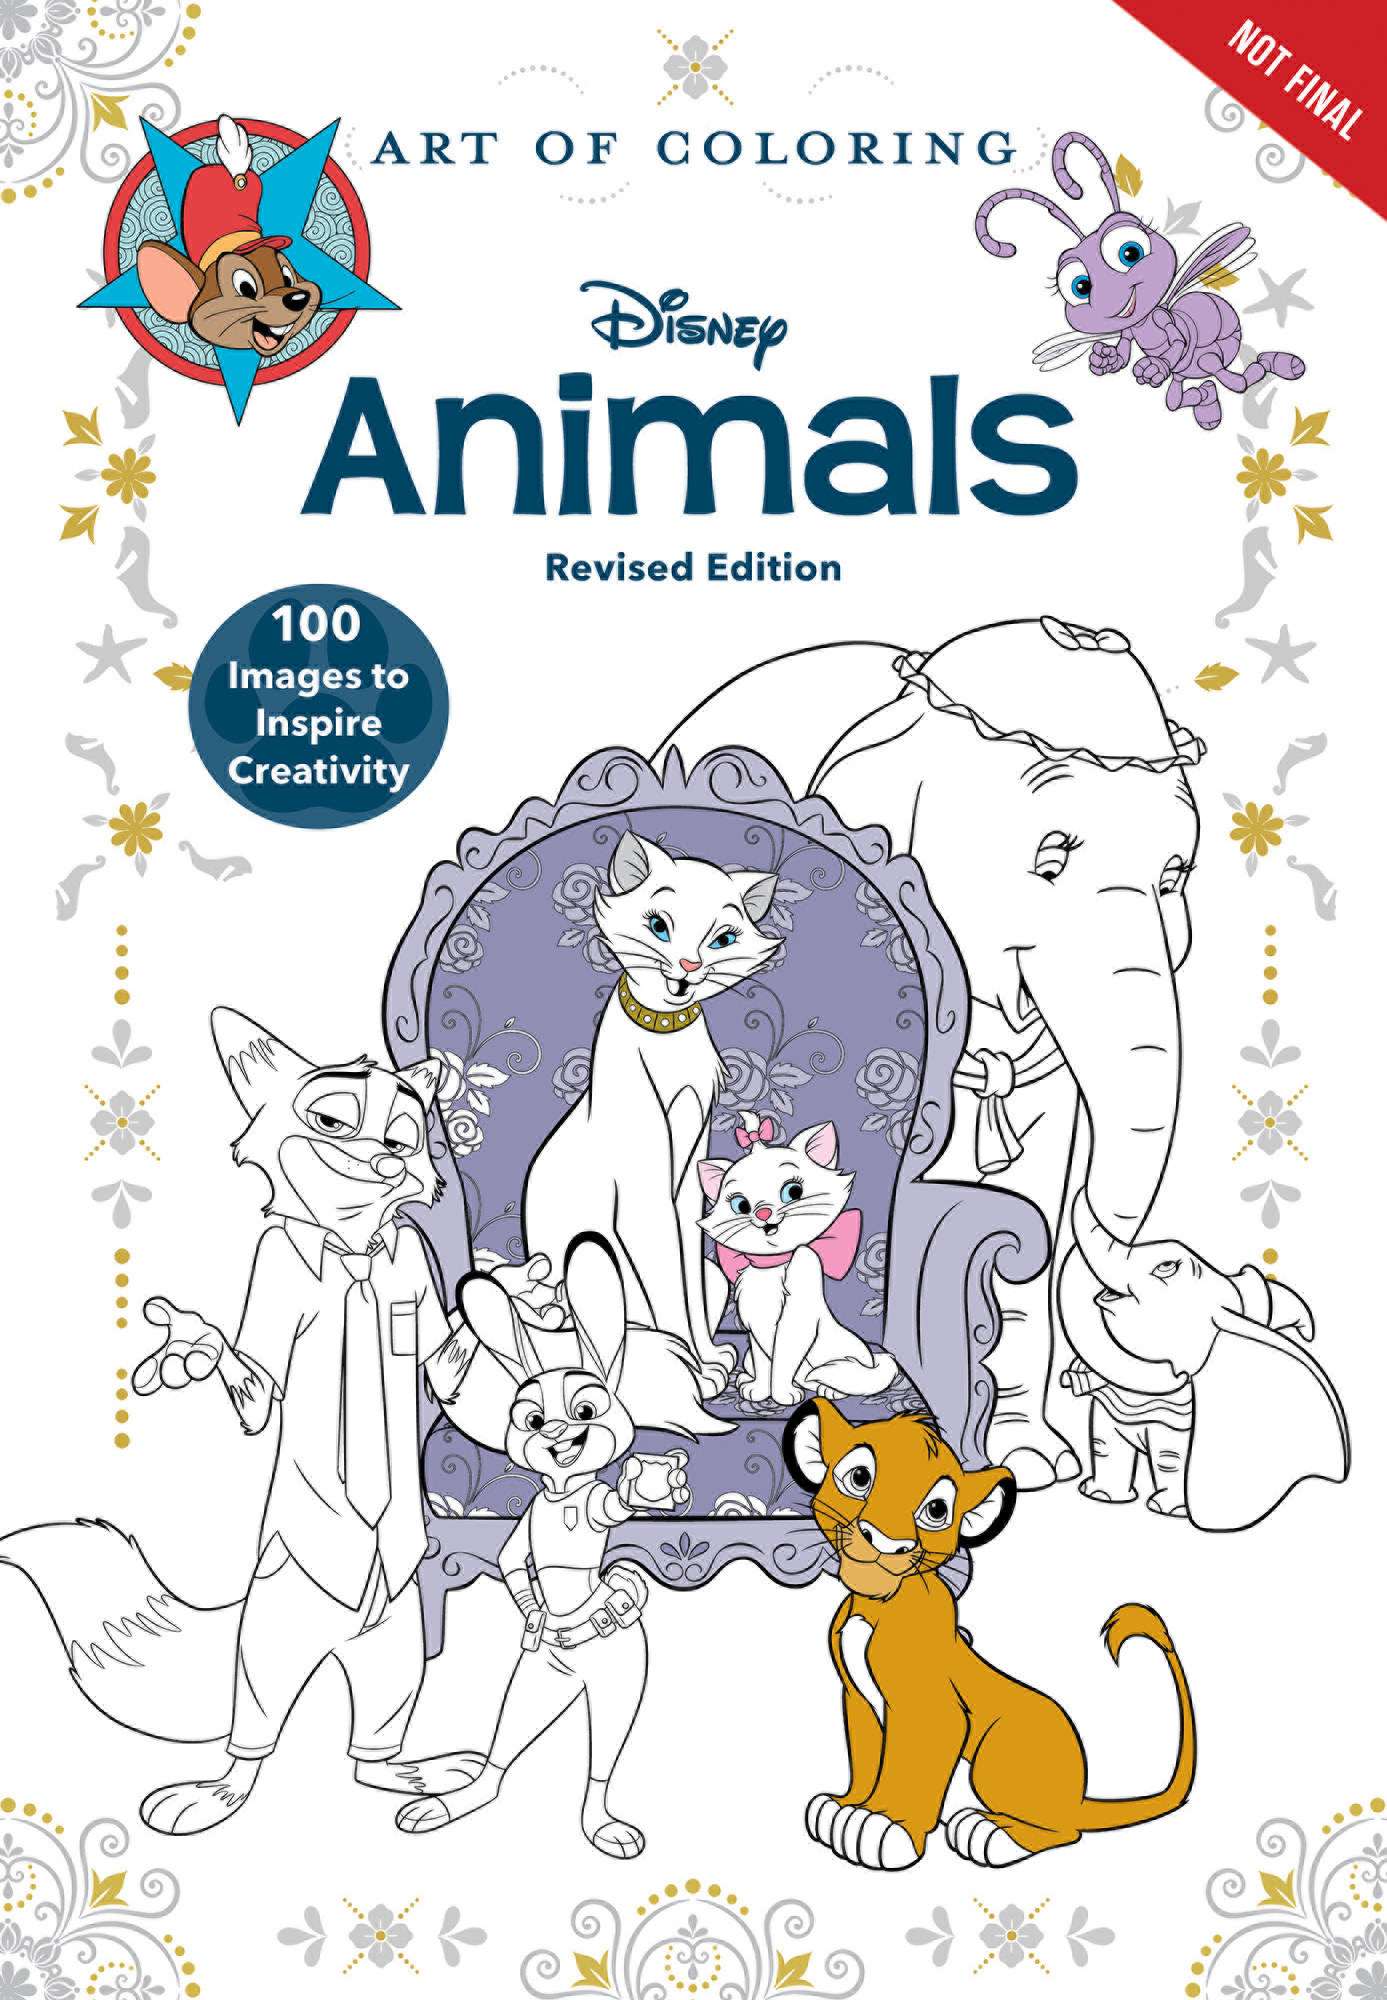 Art of coloring animals by